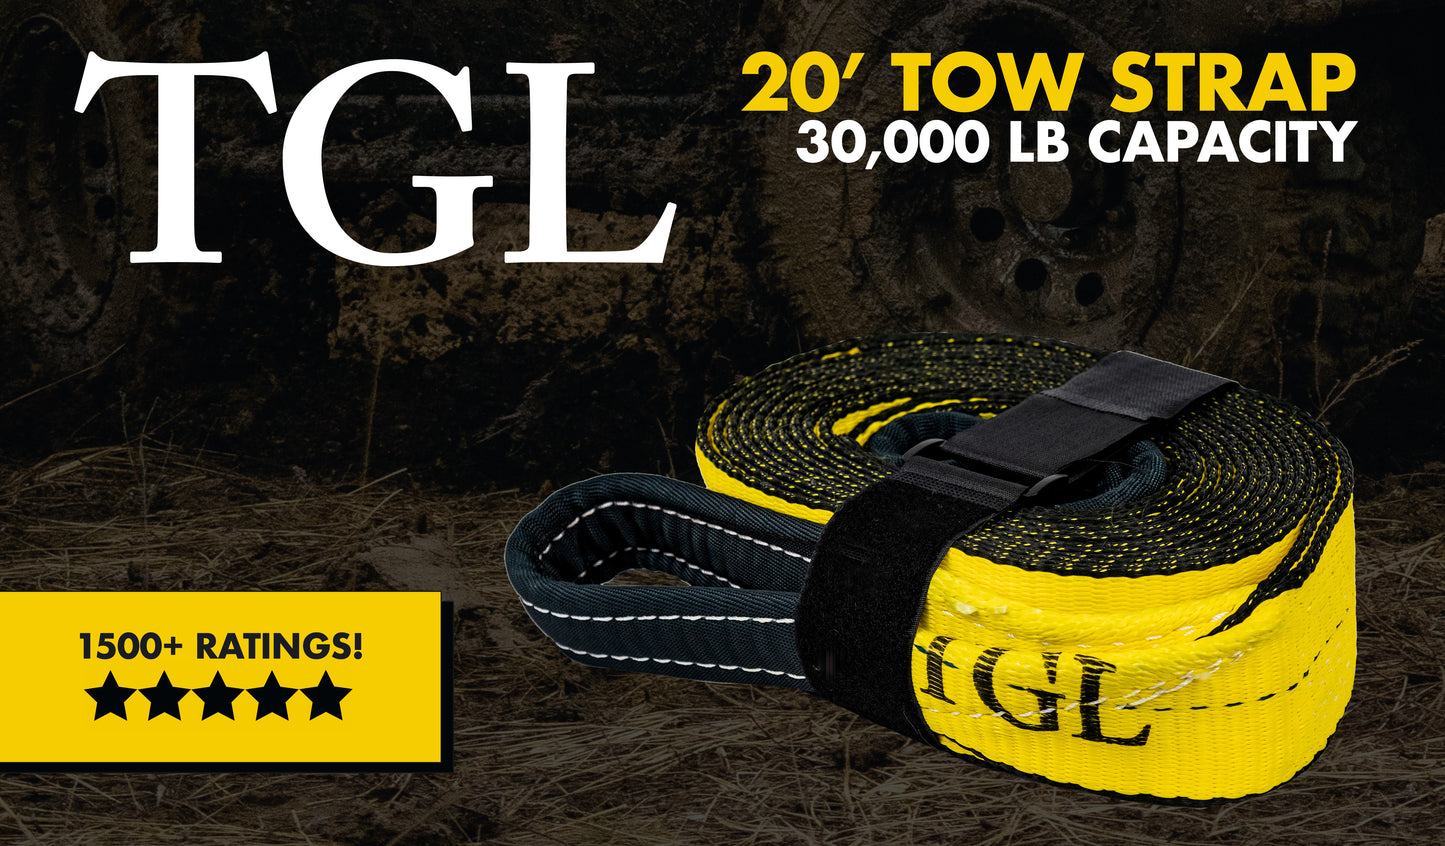 TGL 3 inch, 20 Foot Tow Strap, 30,000 Pound Capacity with Reusable Storage Strap